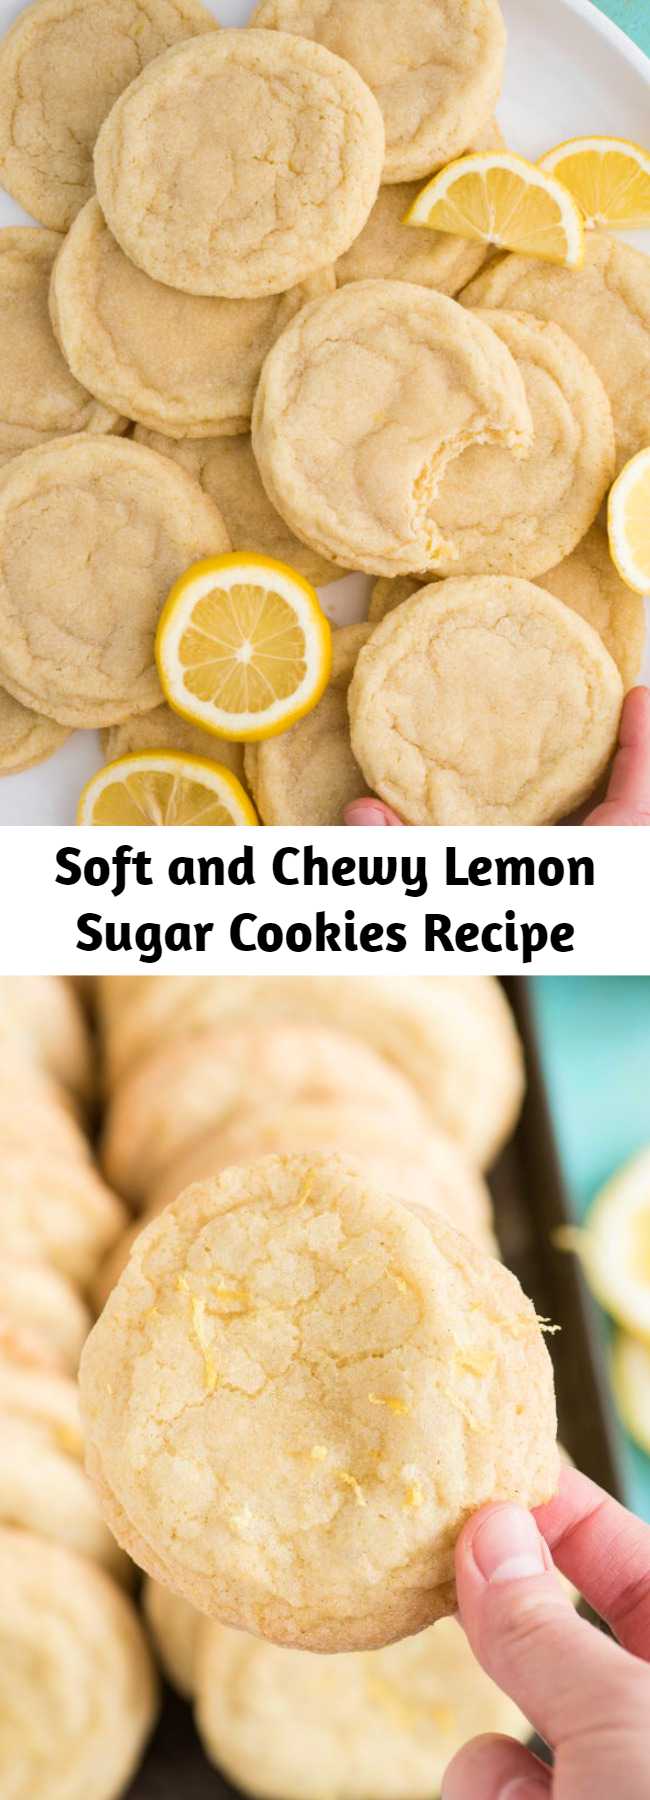 Soft and Chewy Lemon Cookies are a crowd favorite cookie that you can make anytime of the year. These lemon sugar cookies are thick and chewy and easy to freeze. Easy to make in one bowl with fresh lemon and everyday ingredients. #lemoncookies #sugarcookies #cookies